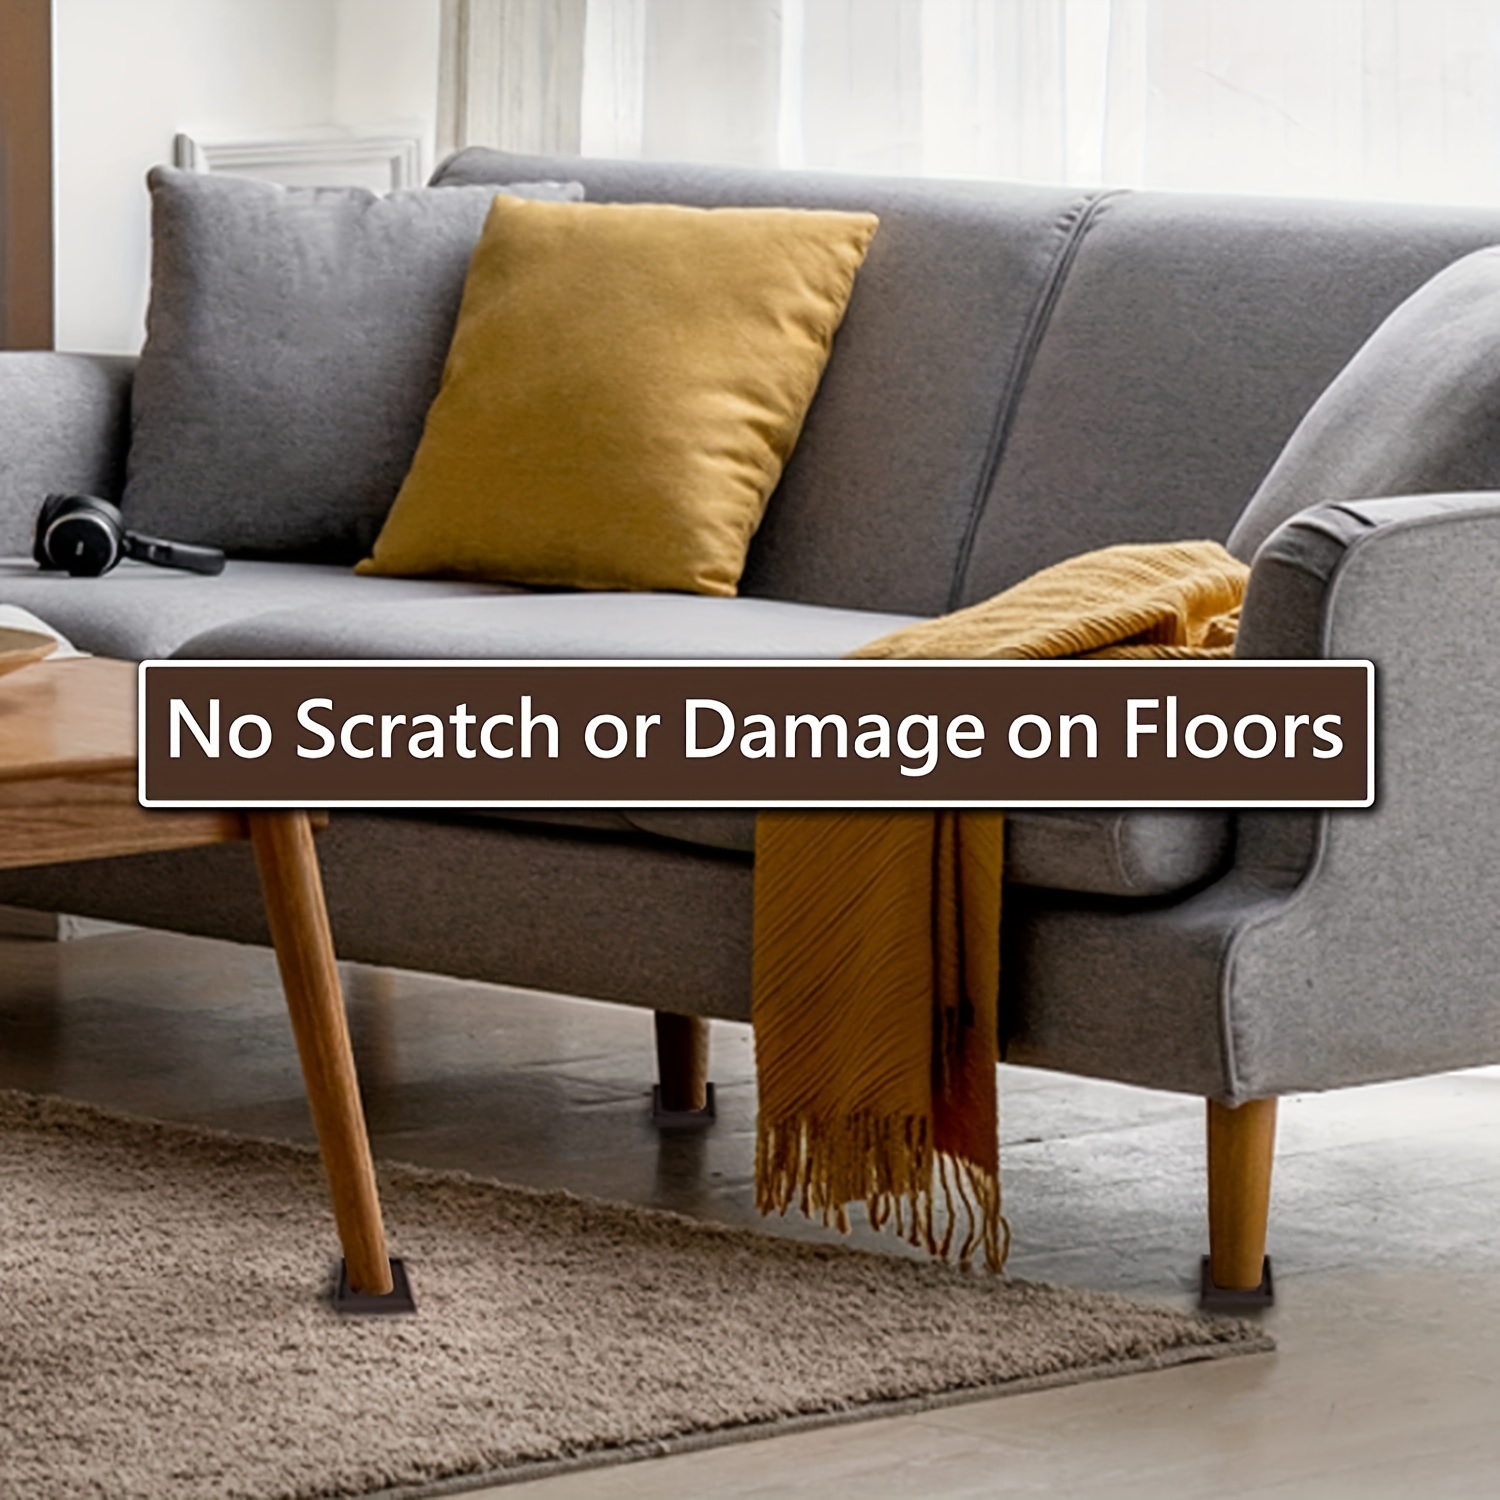 How To Keep Furniture From Sliding On Wood Floor